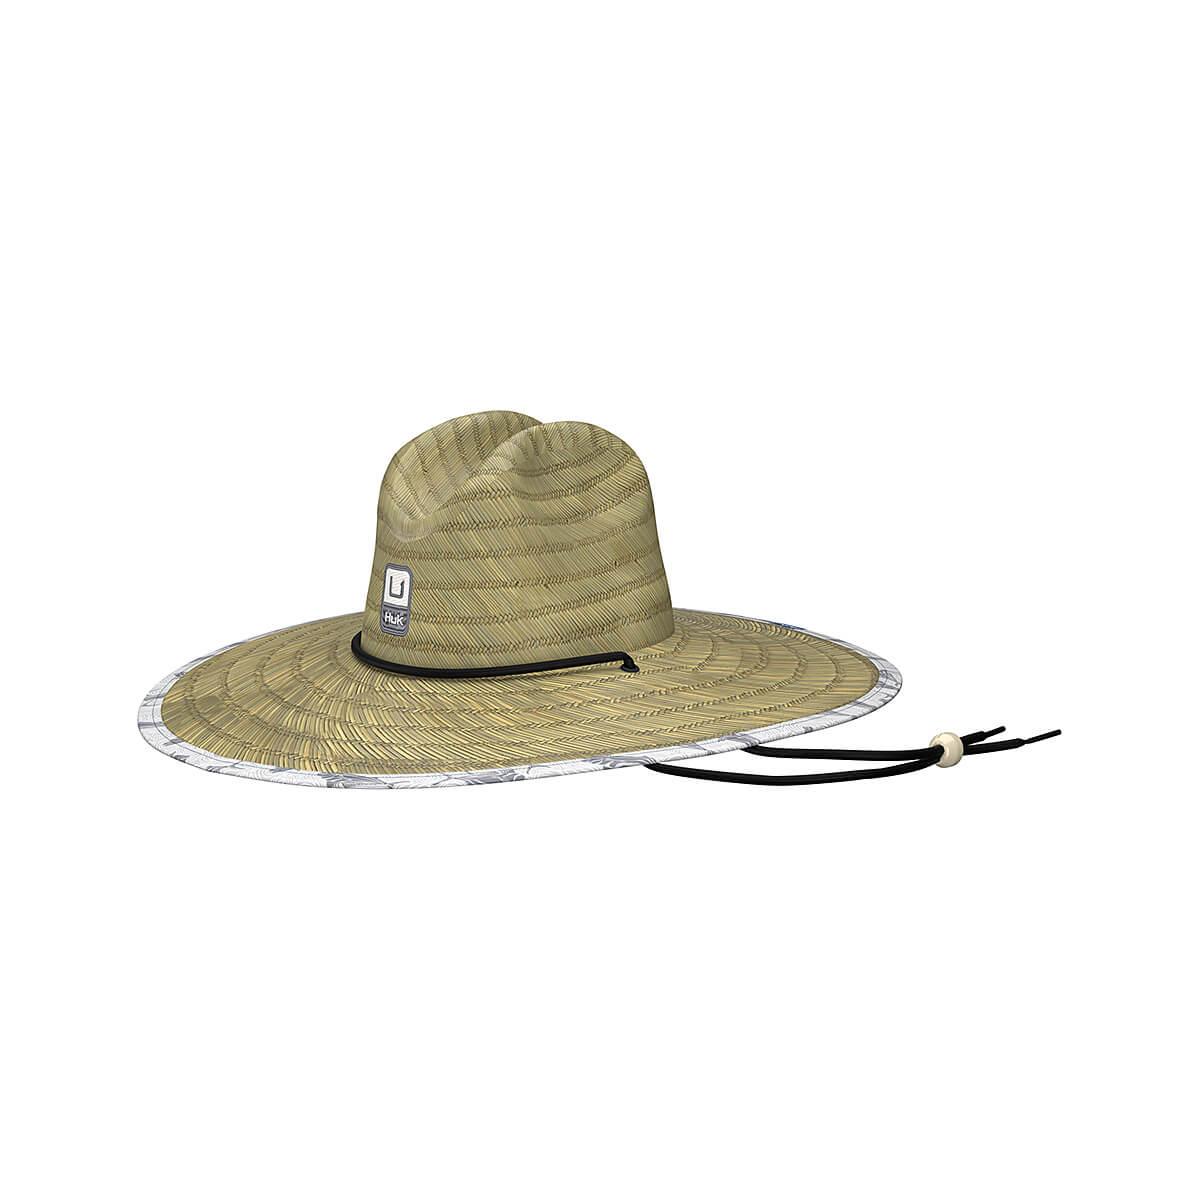 Mast General Store  Rooster Wake Straw Hat